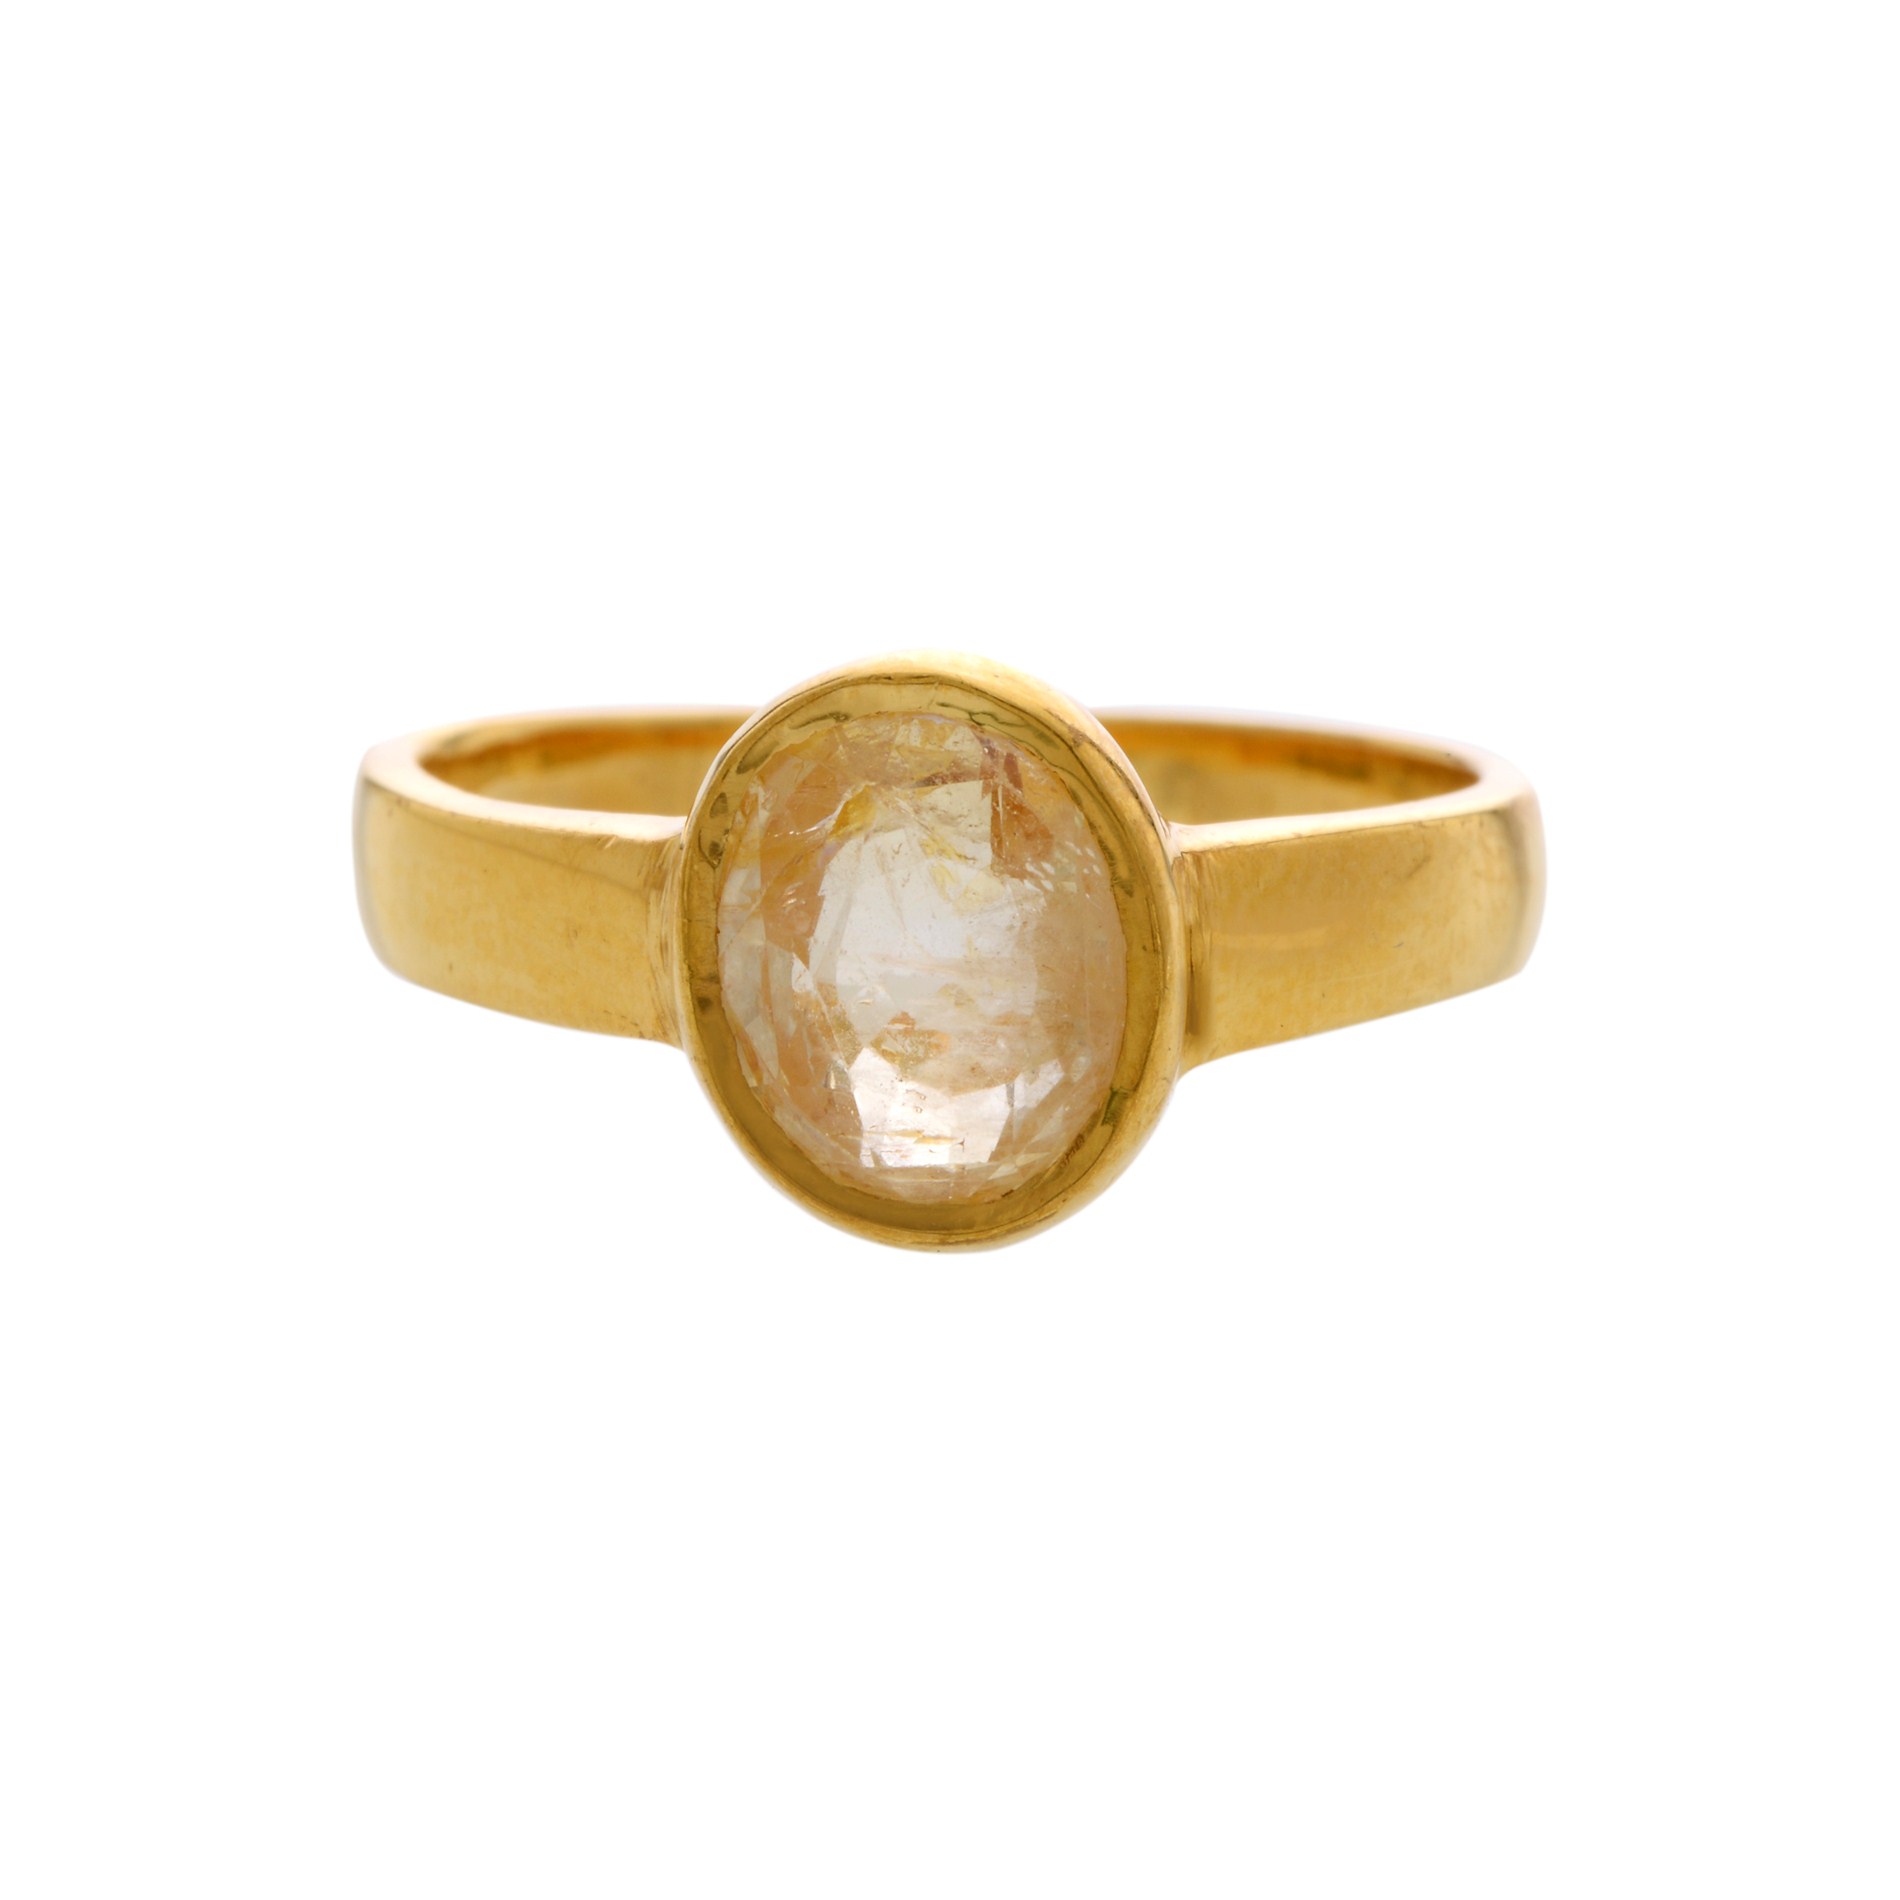 Buy Yellow Sapphire Finger Ring with one stone online